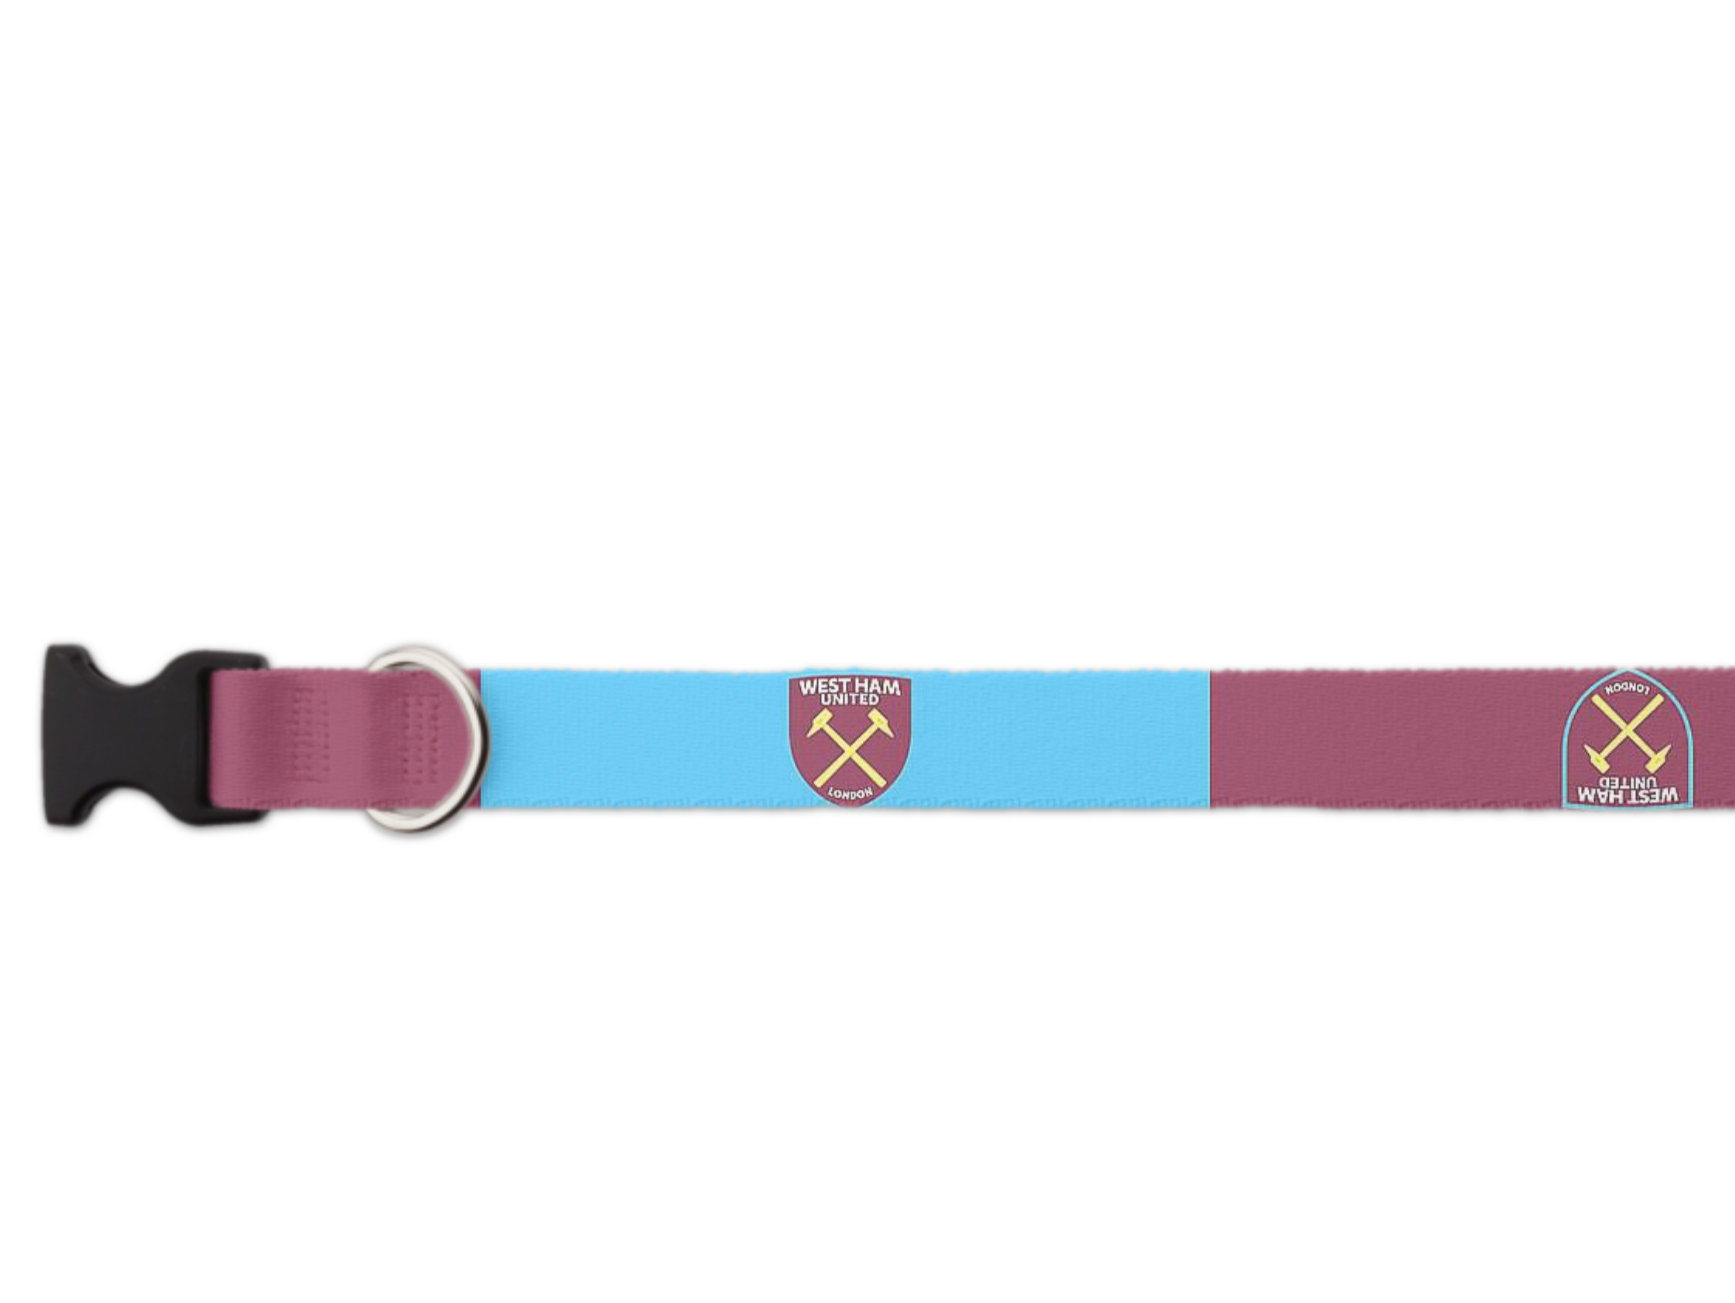 West Ham United FC Dog Collar - READY TO SHIP – 3 Red Rovers